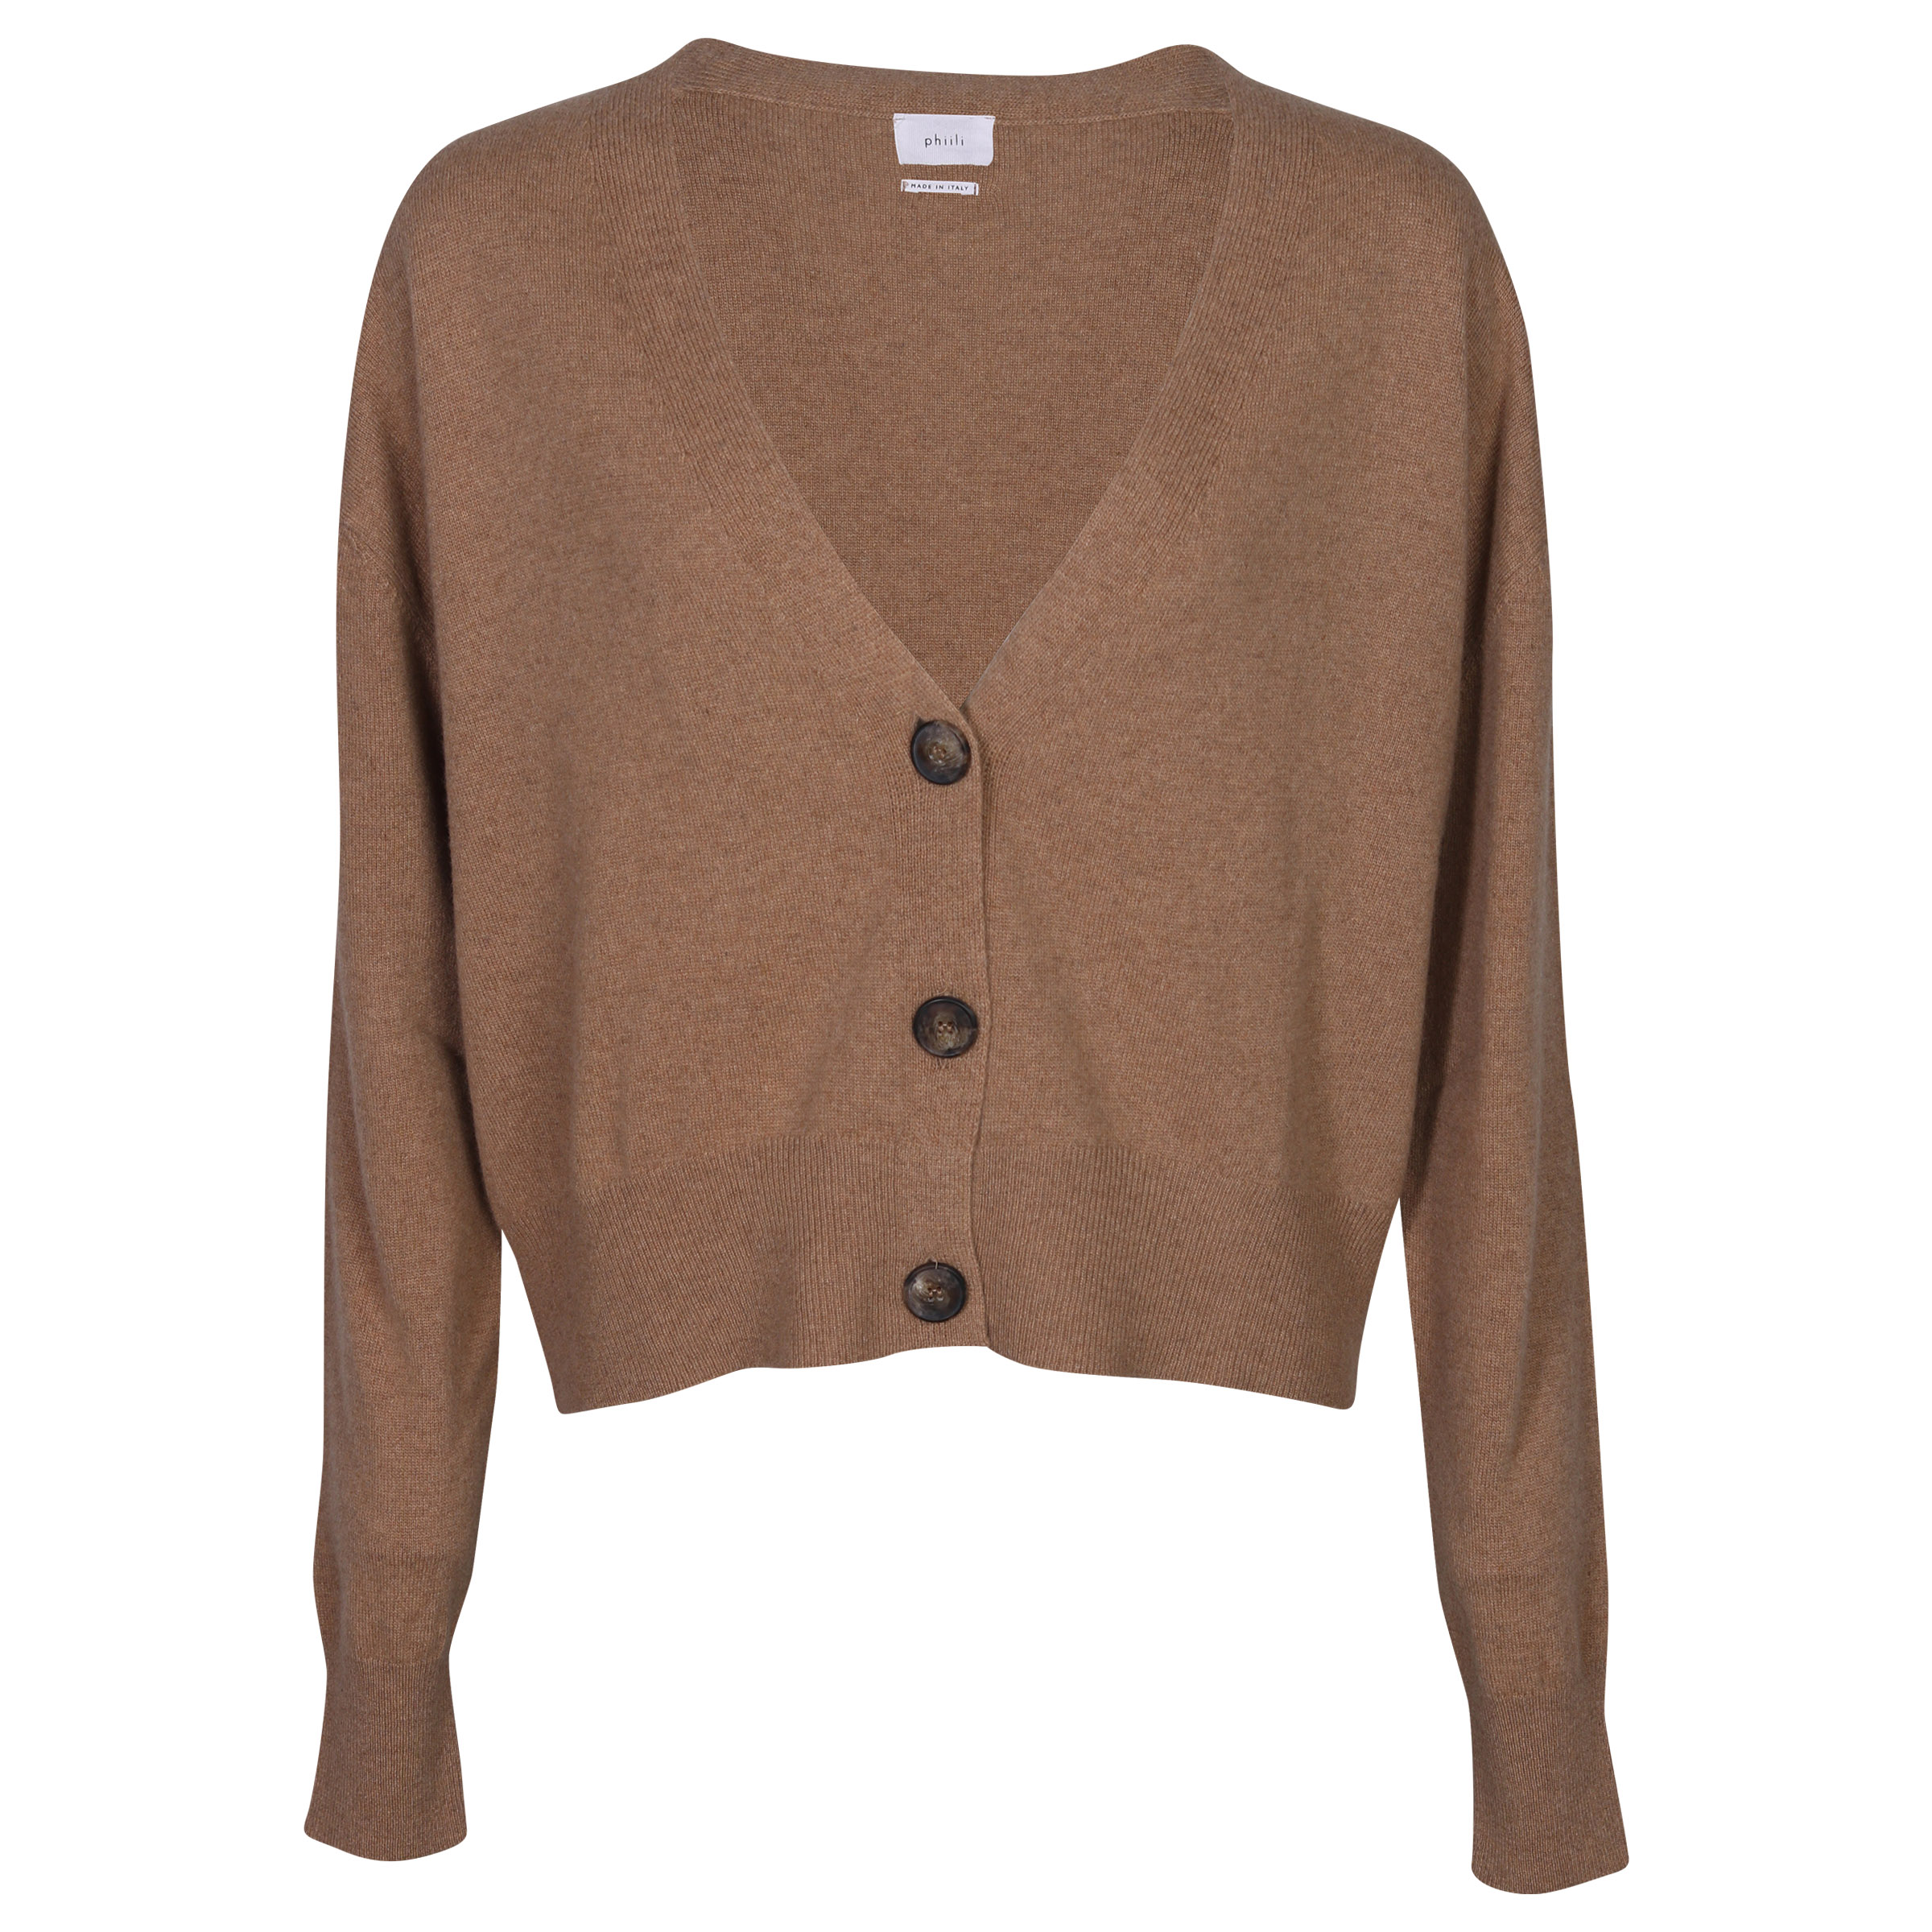 Phiili Recycled Cashmere Cardigan in Camel